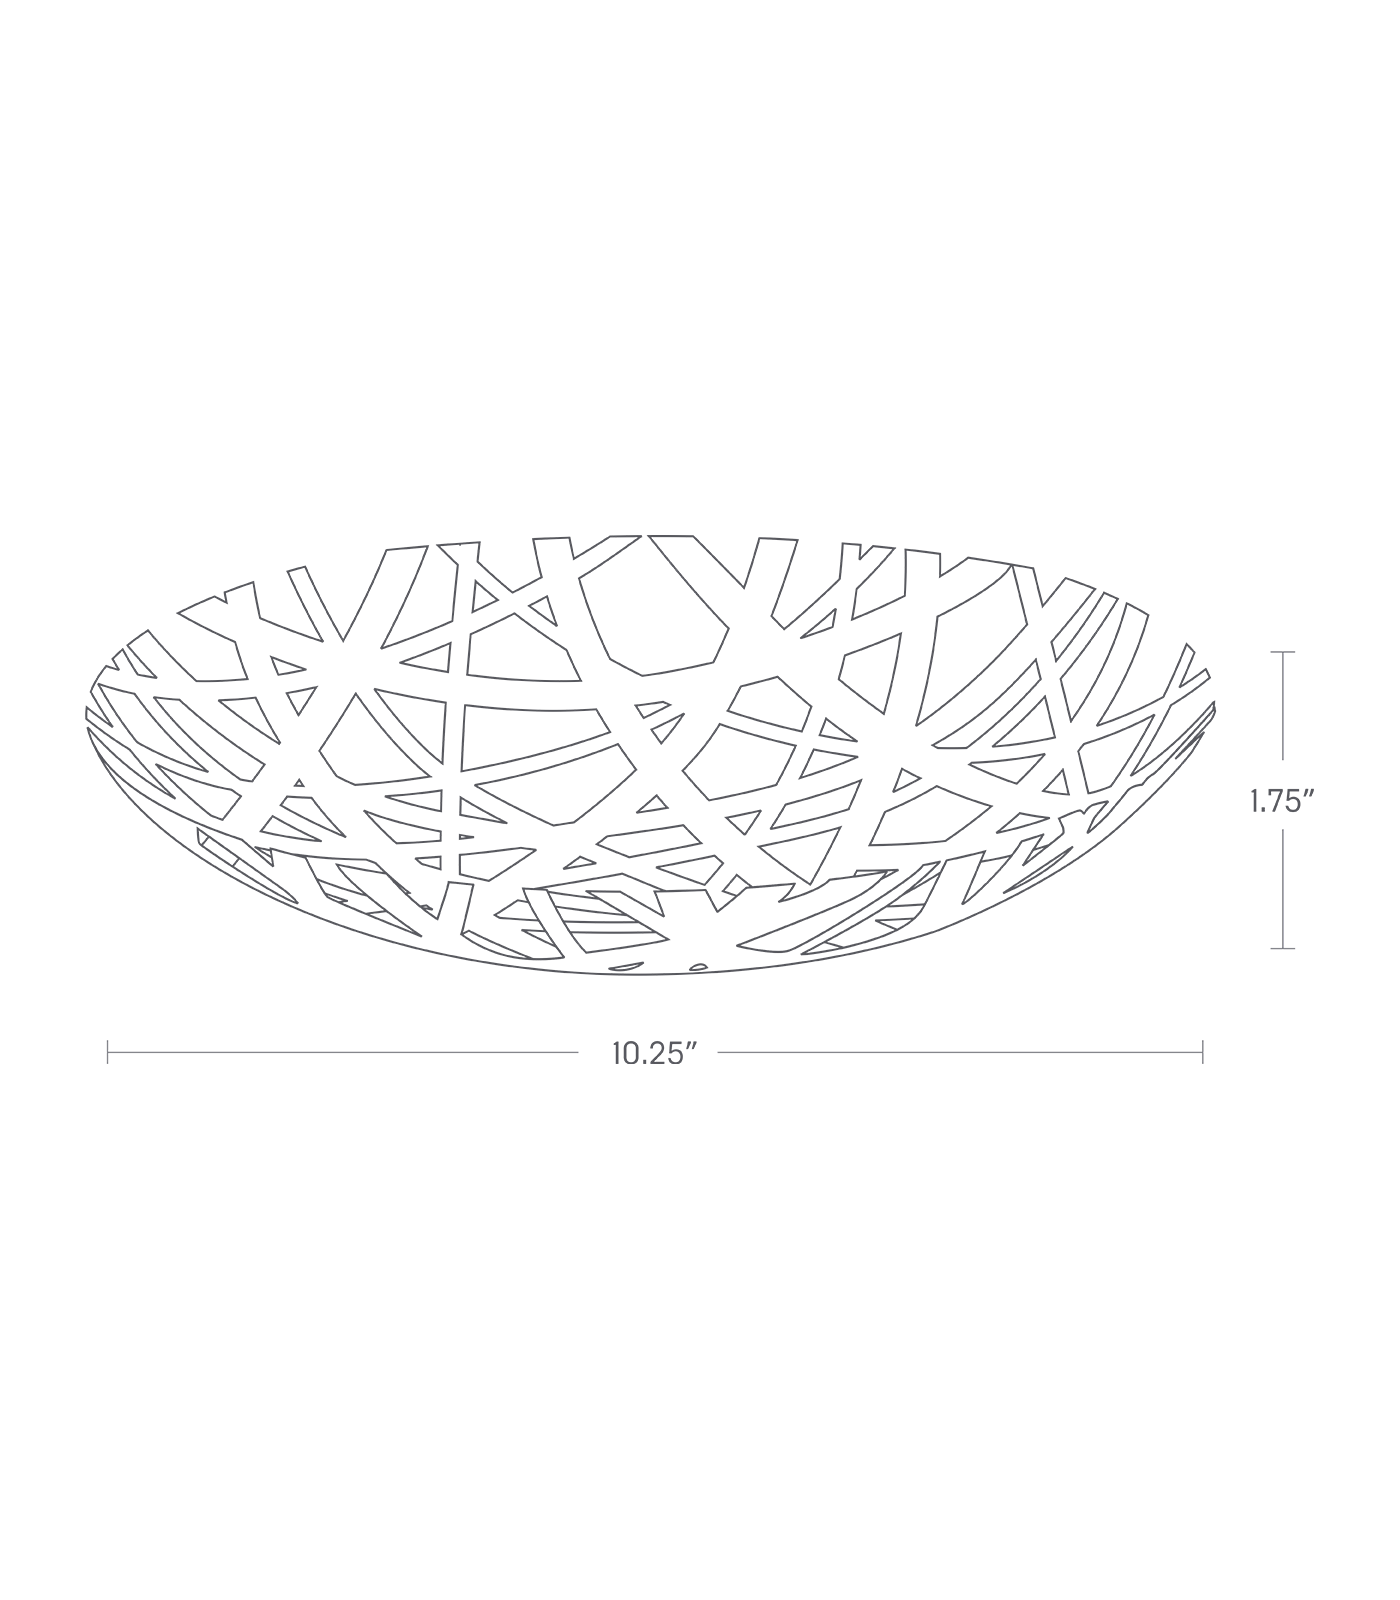 Dimenision image for Fruit Bowlon a white background showing total width and length of 10.25